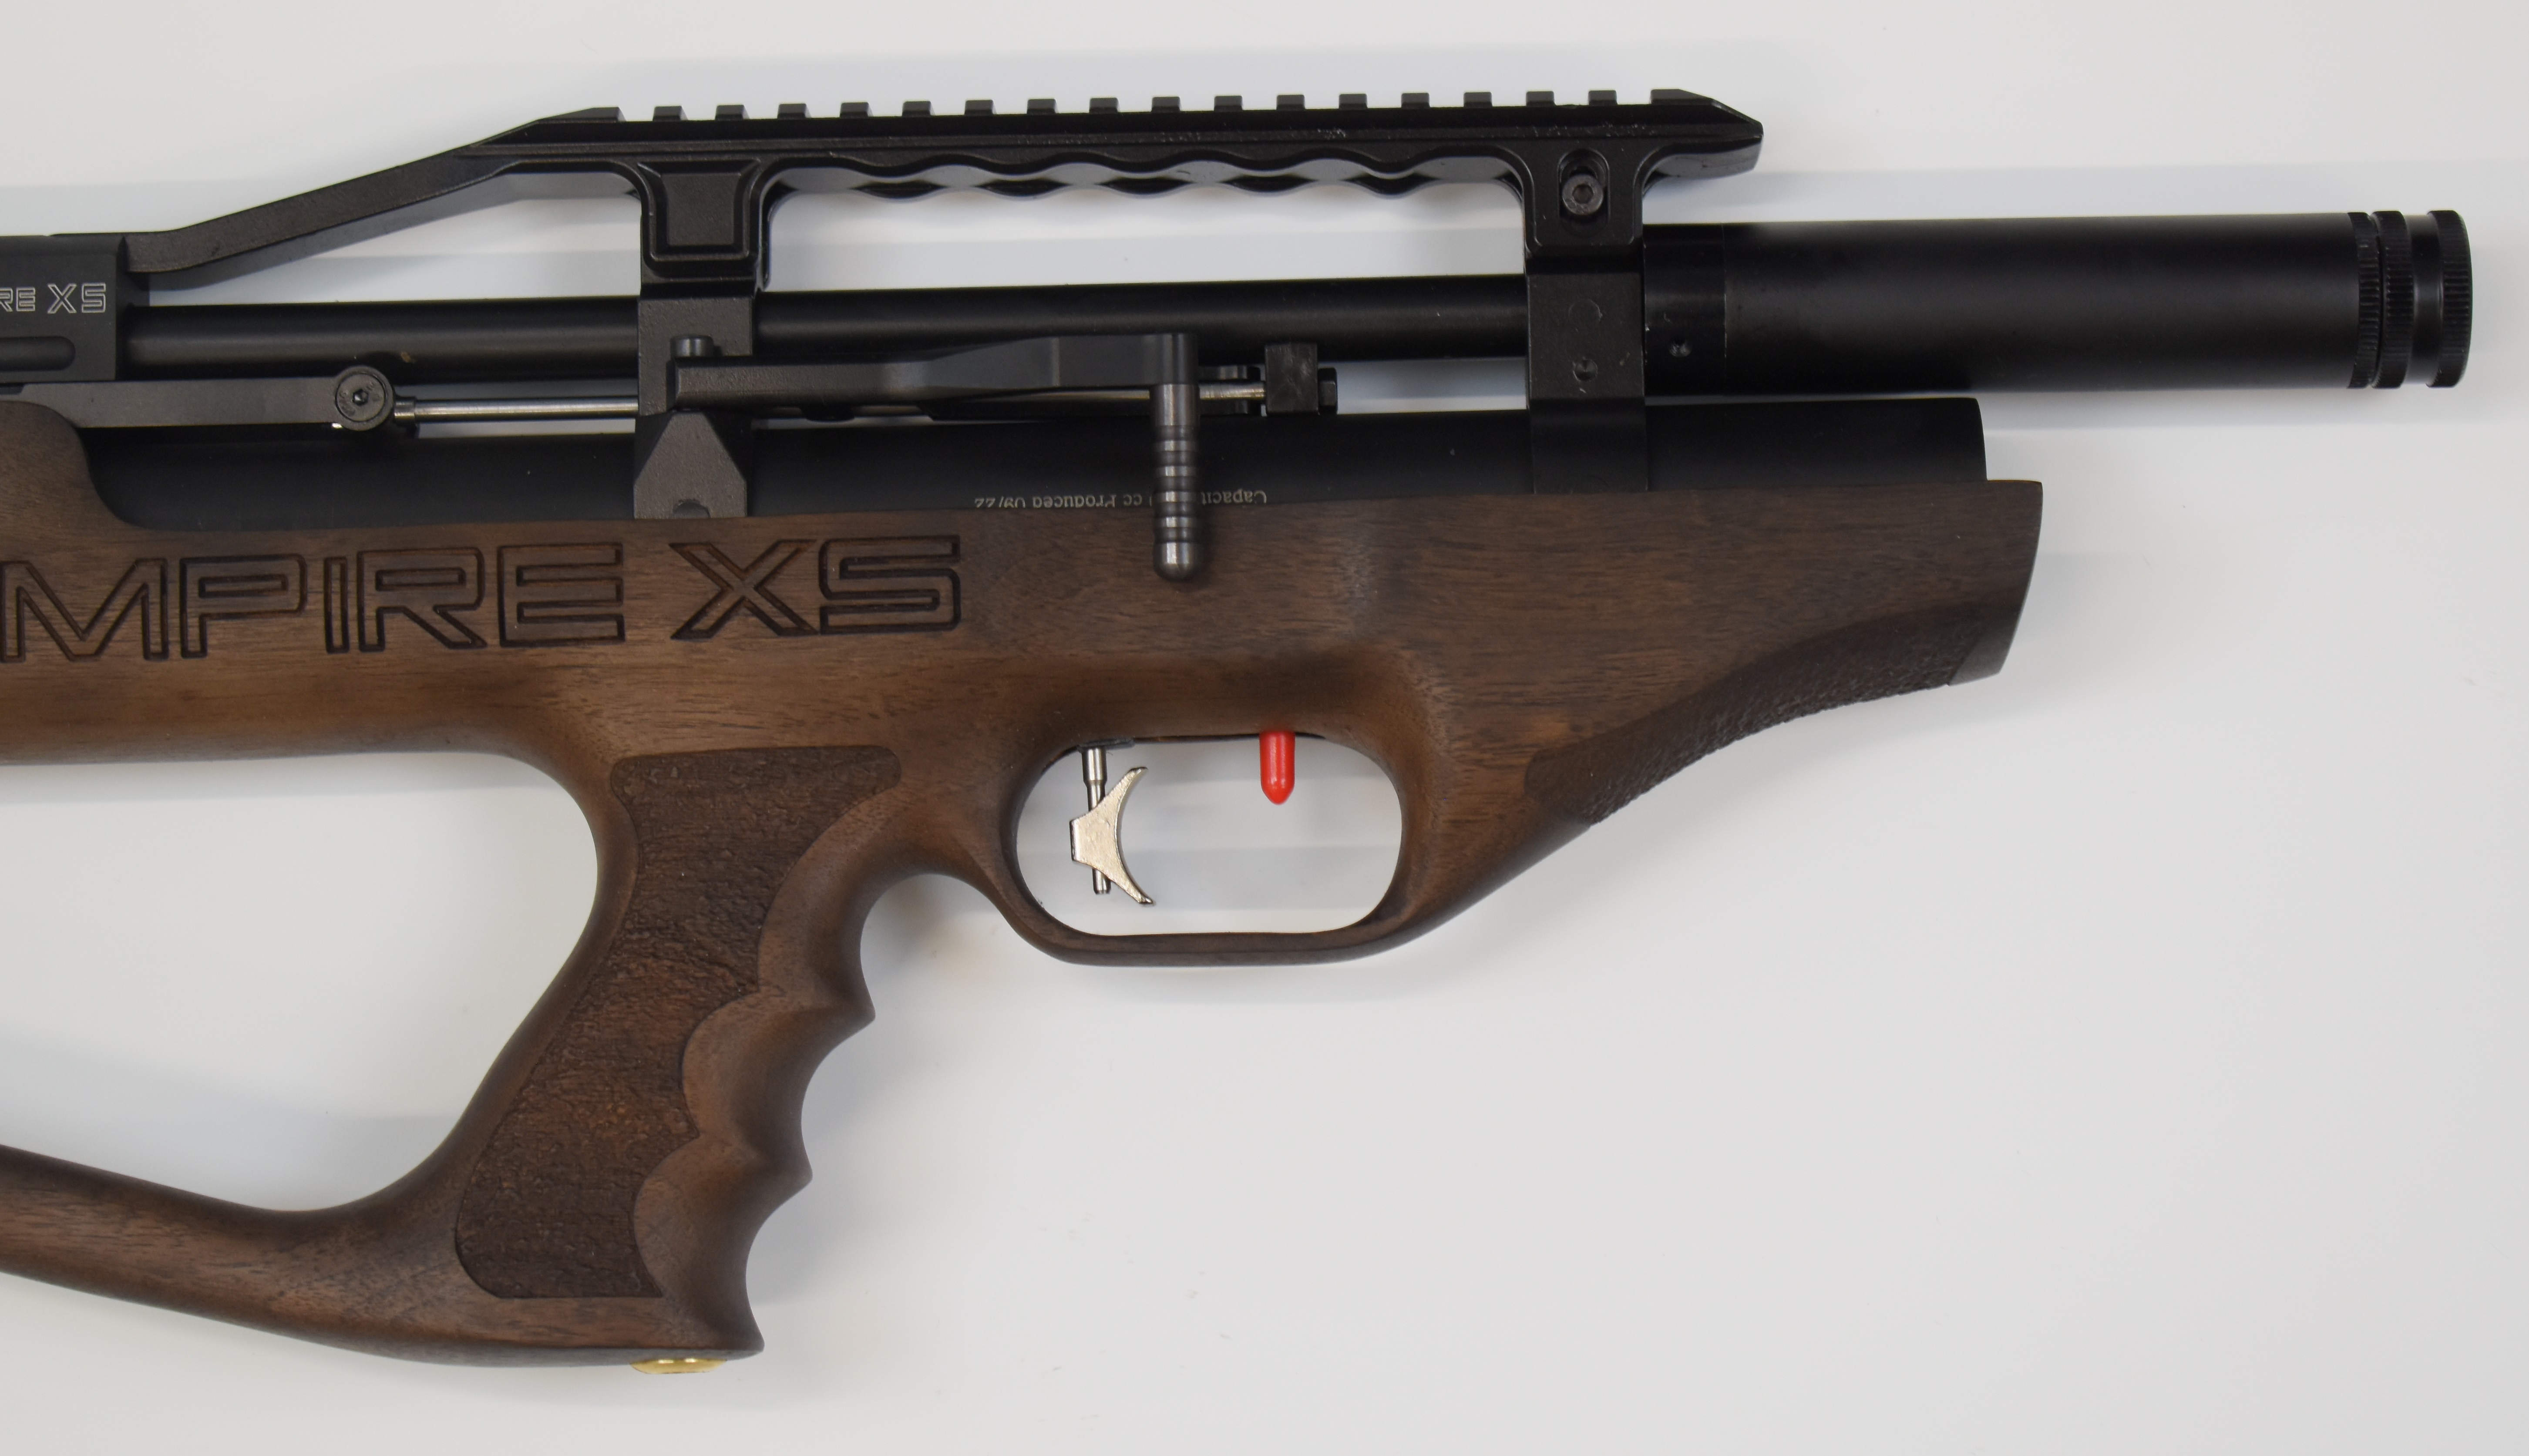 Kral Puncher Empire XS .177 PCP carbine air rifle with textured pistol grip, two 14-shot magazines - Image 4 of 9